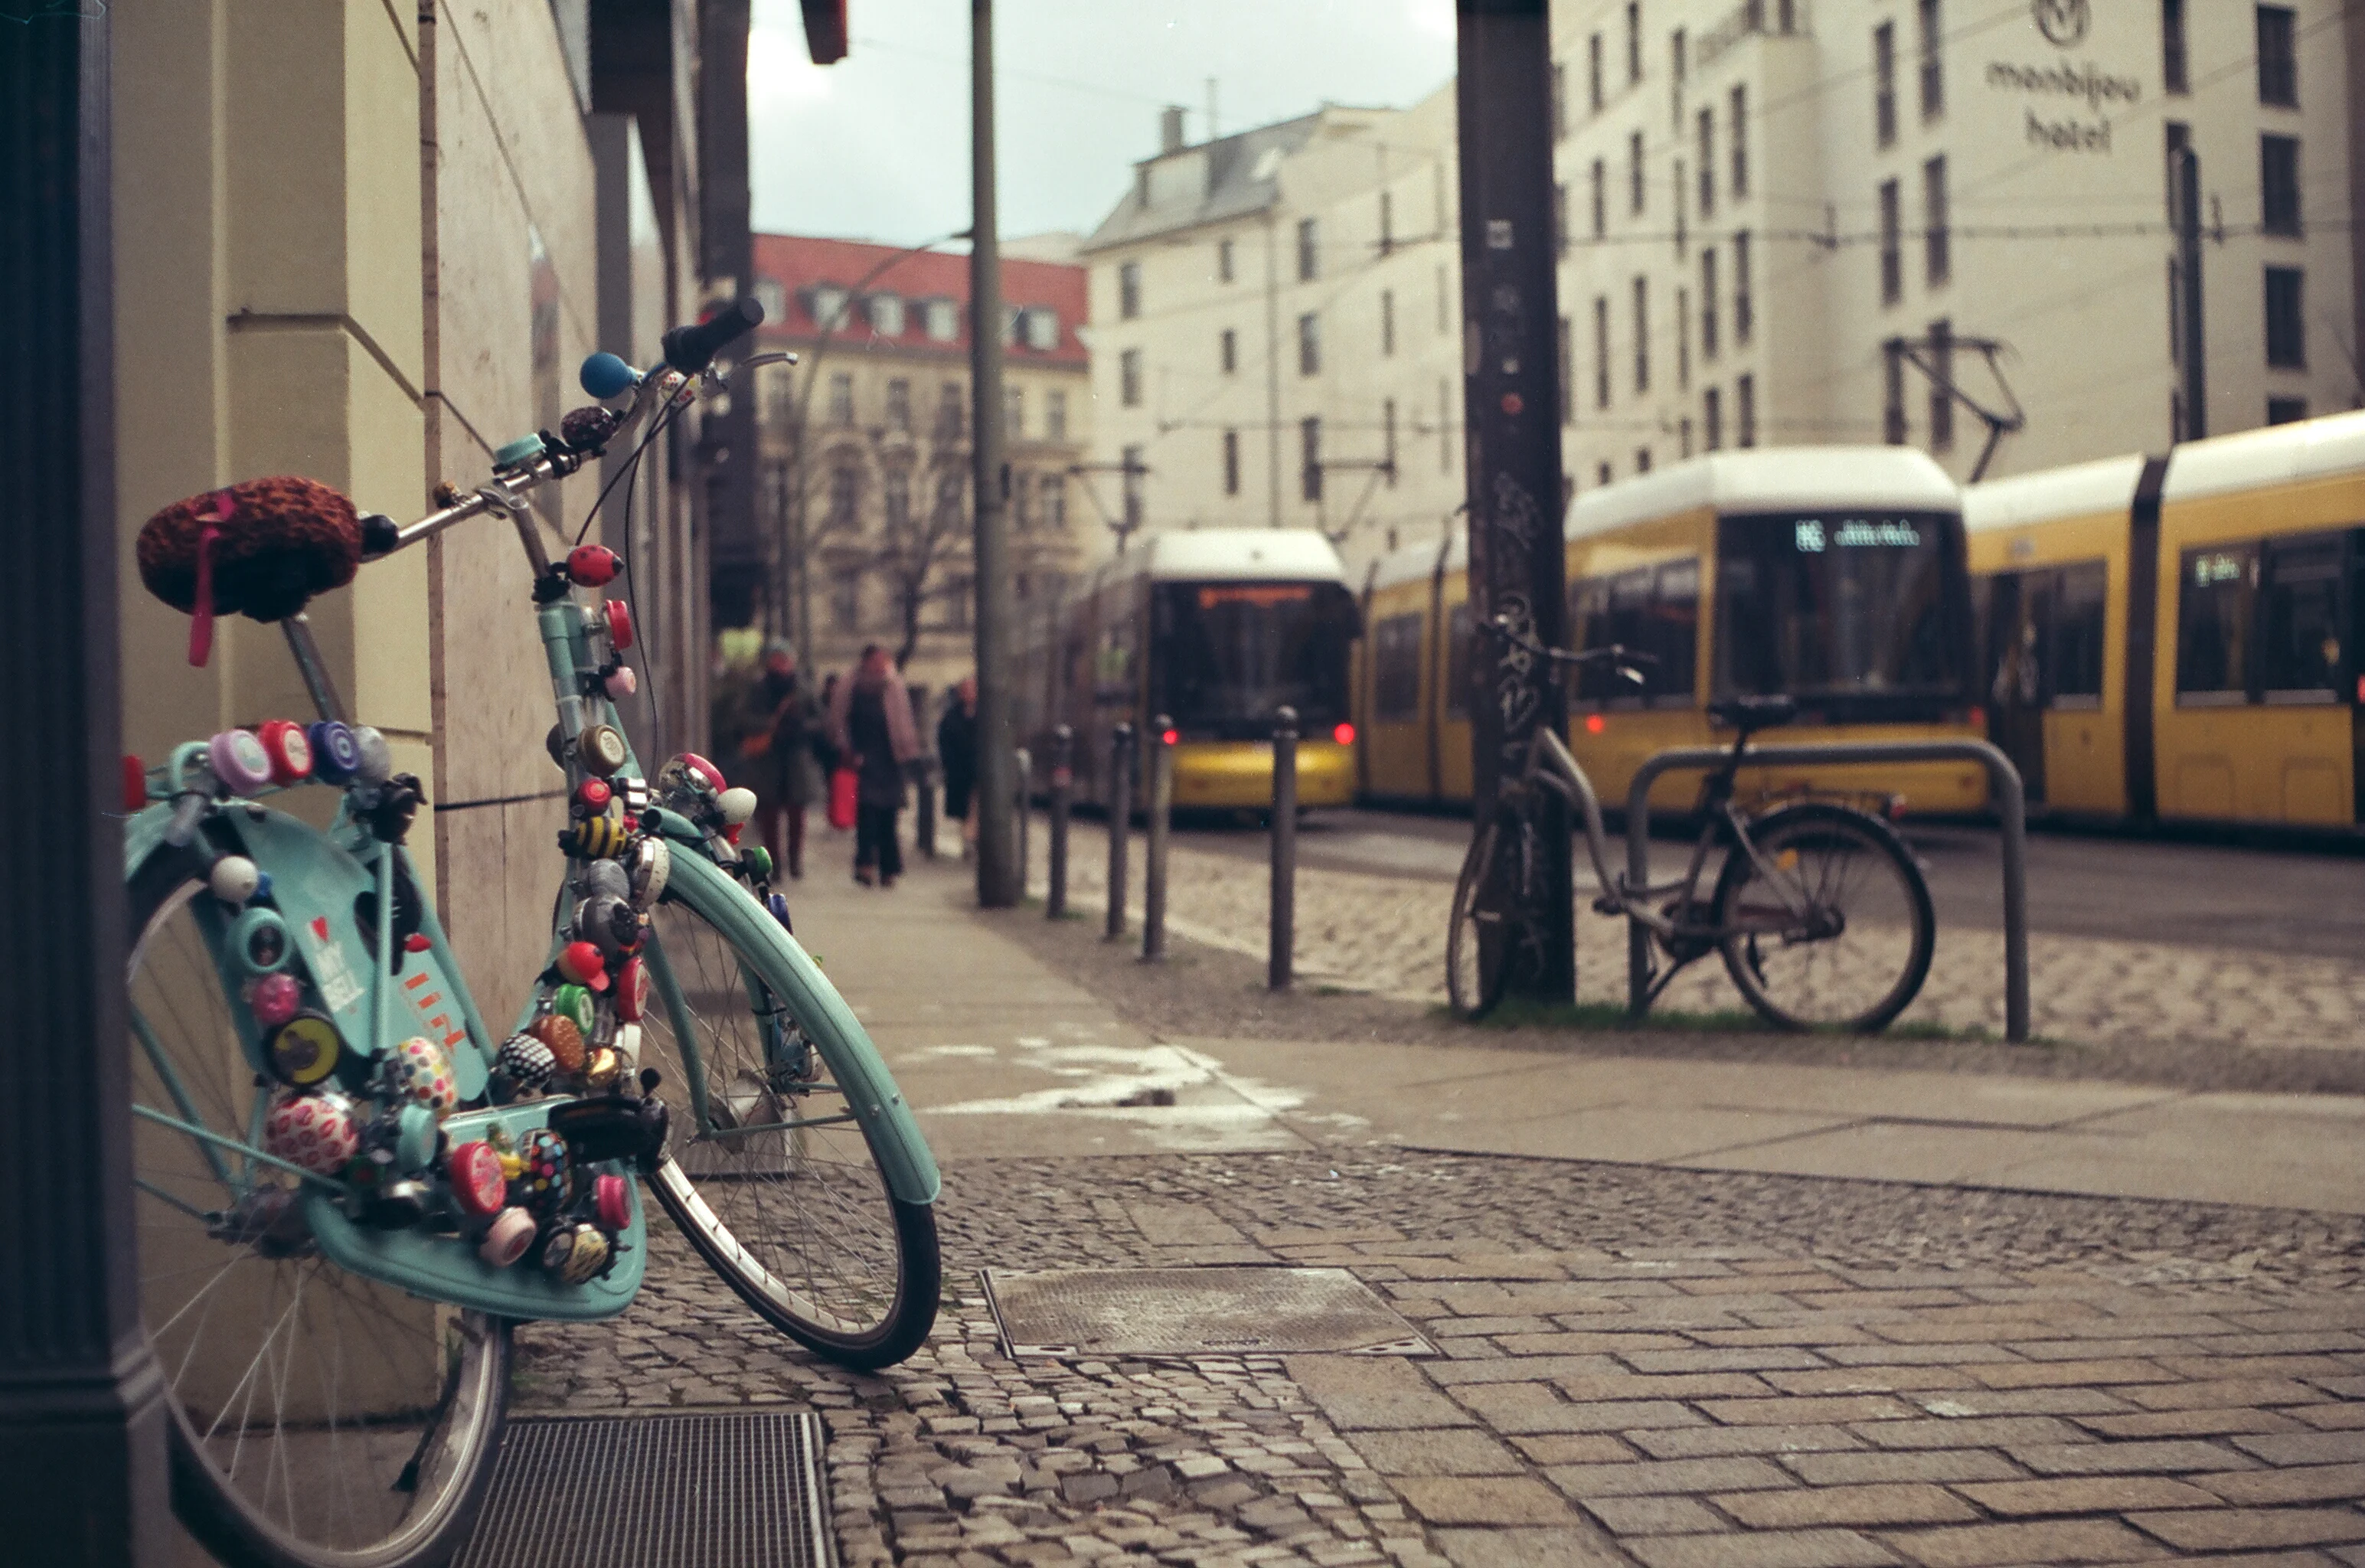 Colorful bike and trams in the background